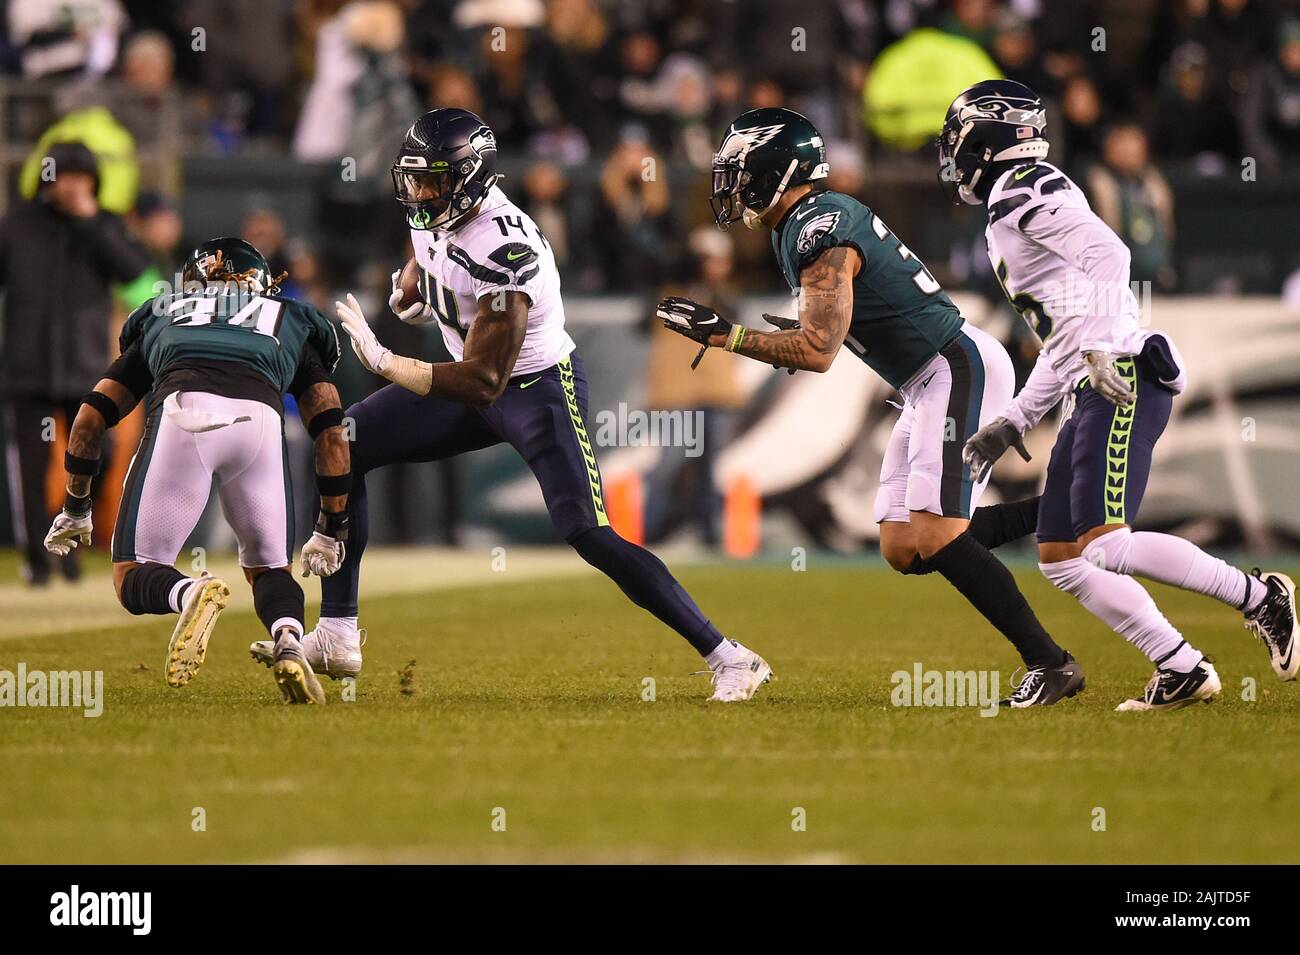 JAN 05, 2020 : Seattle Seahawks wide receiver D.K. Metcalf (14) rushes after a pass during the NFC wild card matchup between the Seattle Seahawks and the Philadelphia Eagles at Lincoln Financial Field in Philadelphia, PA. Stock Photo